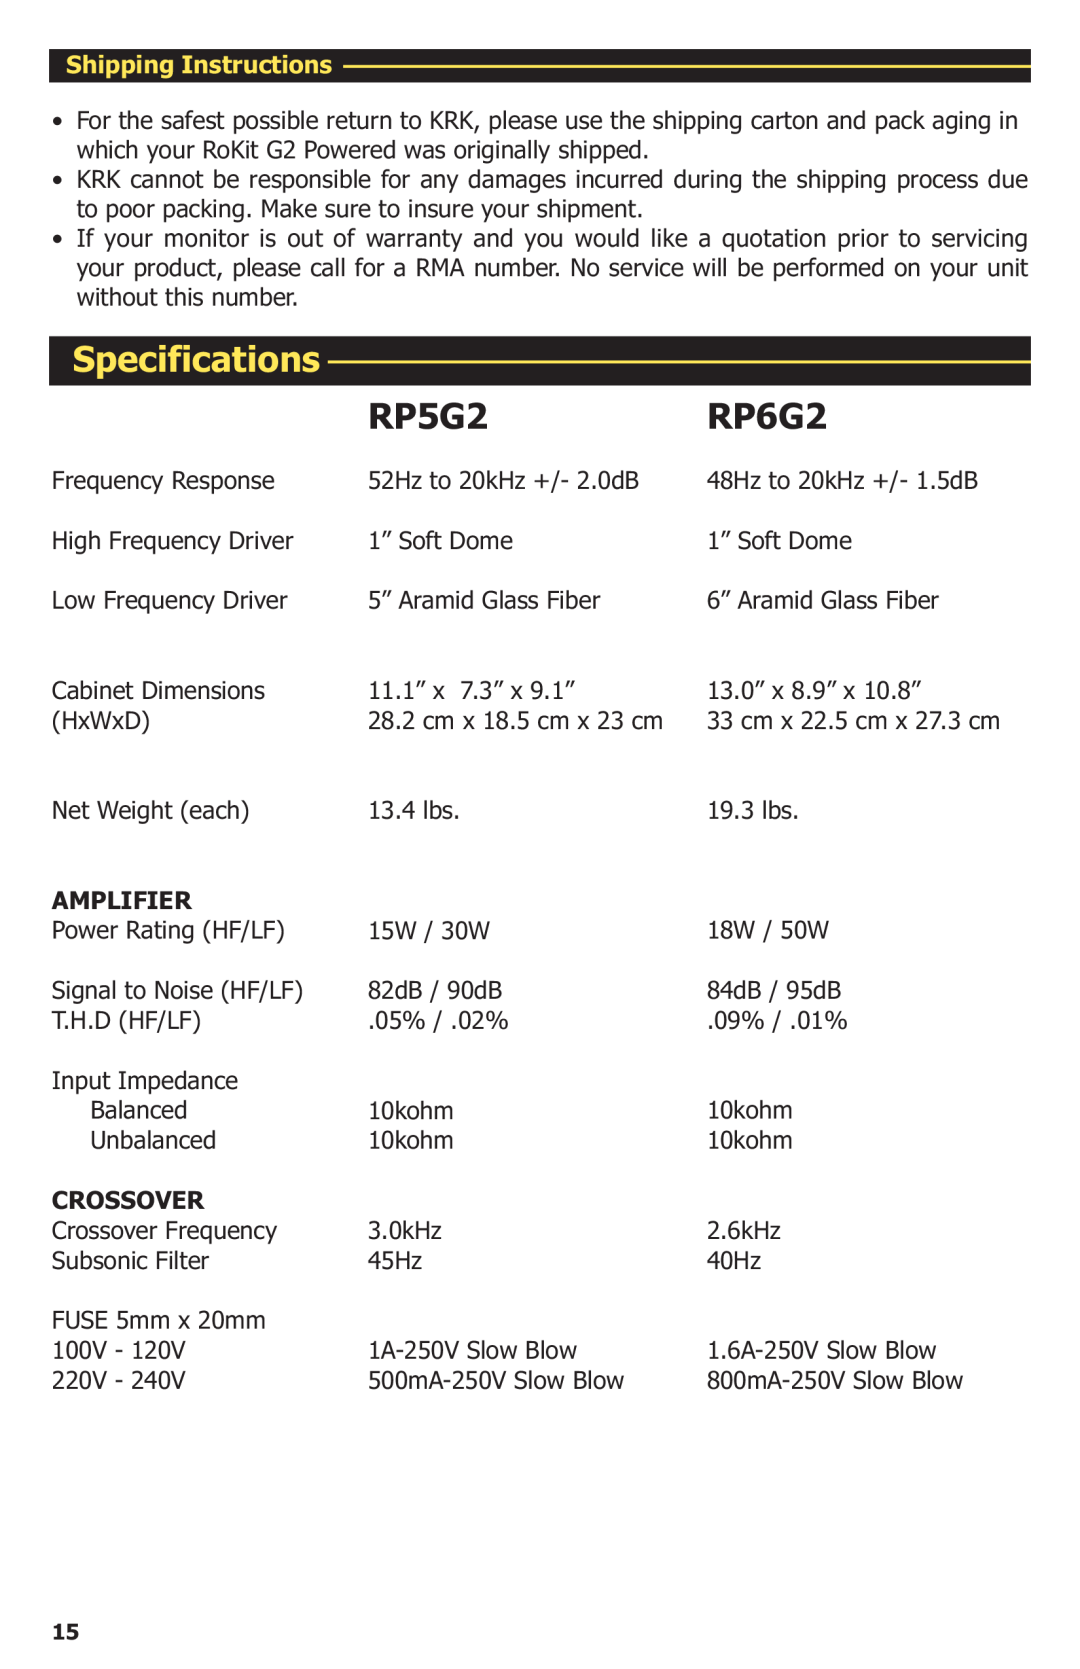 KRK manual Specifications, RP5G2RP6G2, Shipping Instructions, Amplifier 